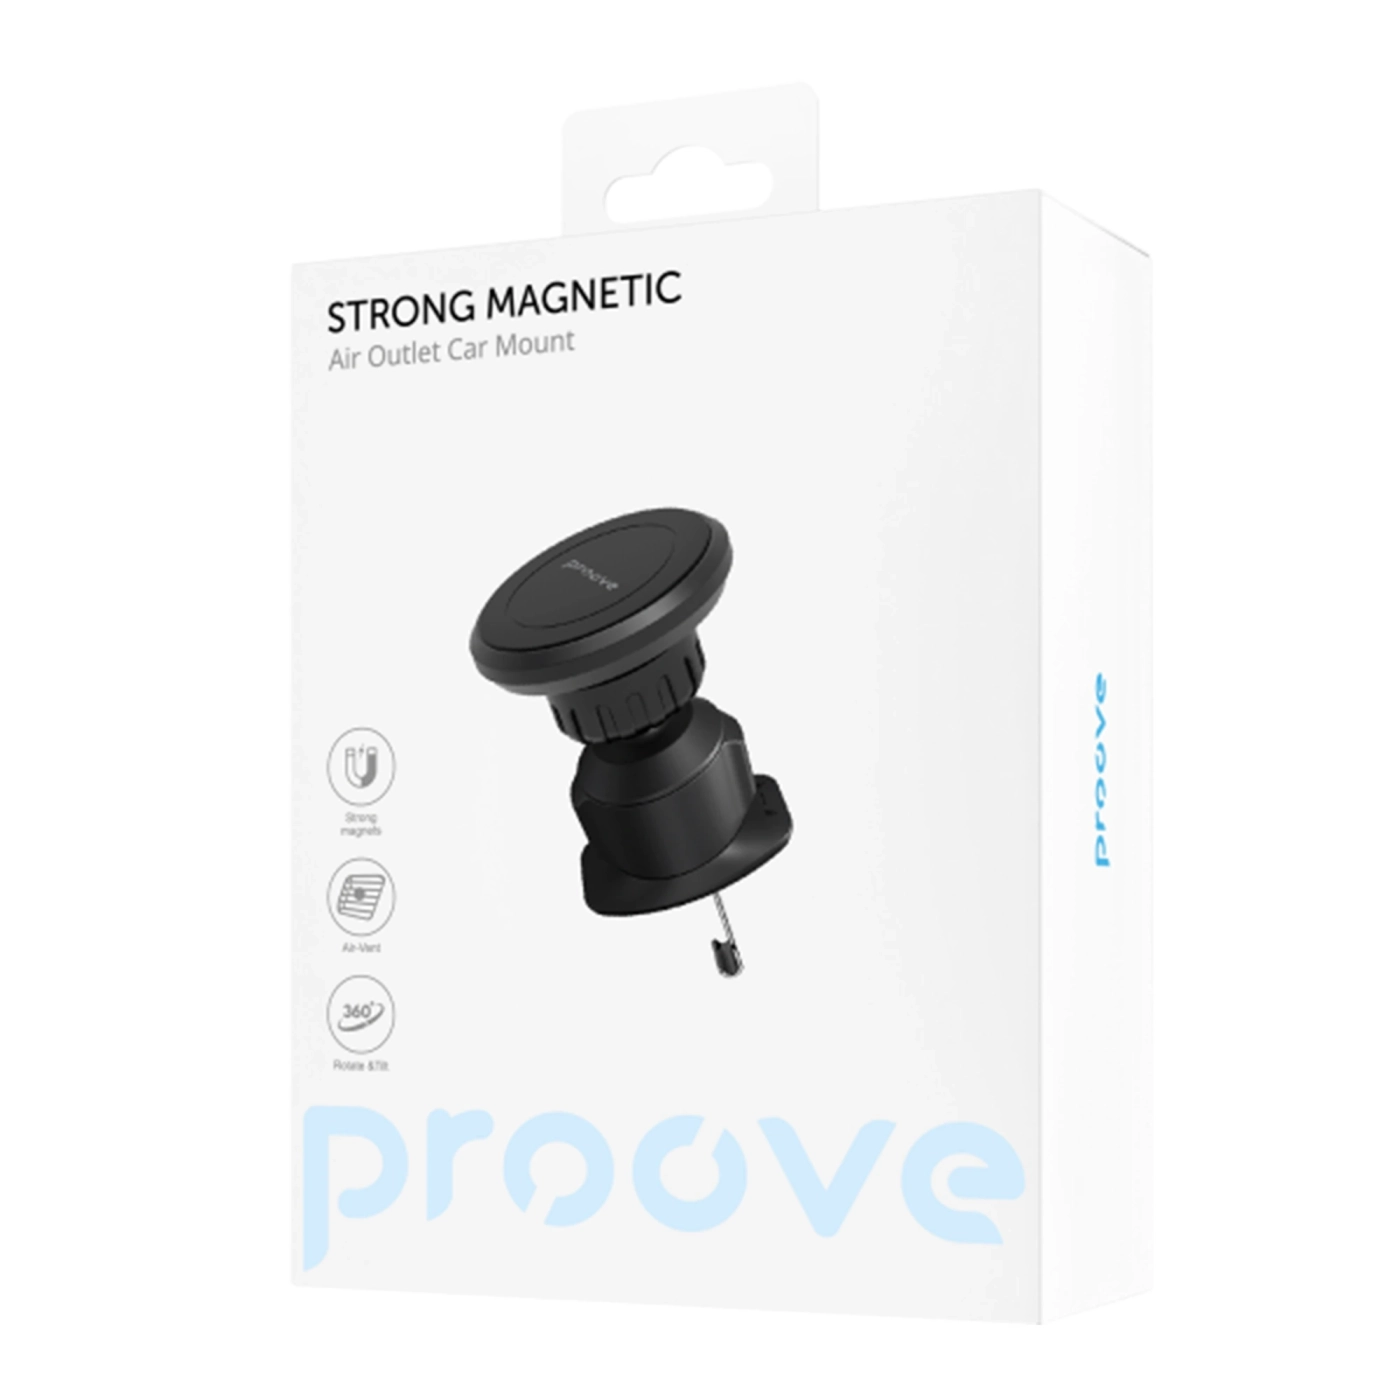 Купити Автотримач Proove Strong Magnetic Air Outlet Car Mount (CHSR00000001) - фото 6